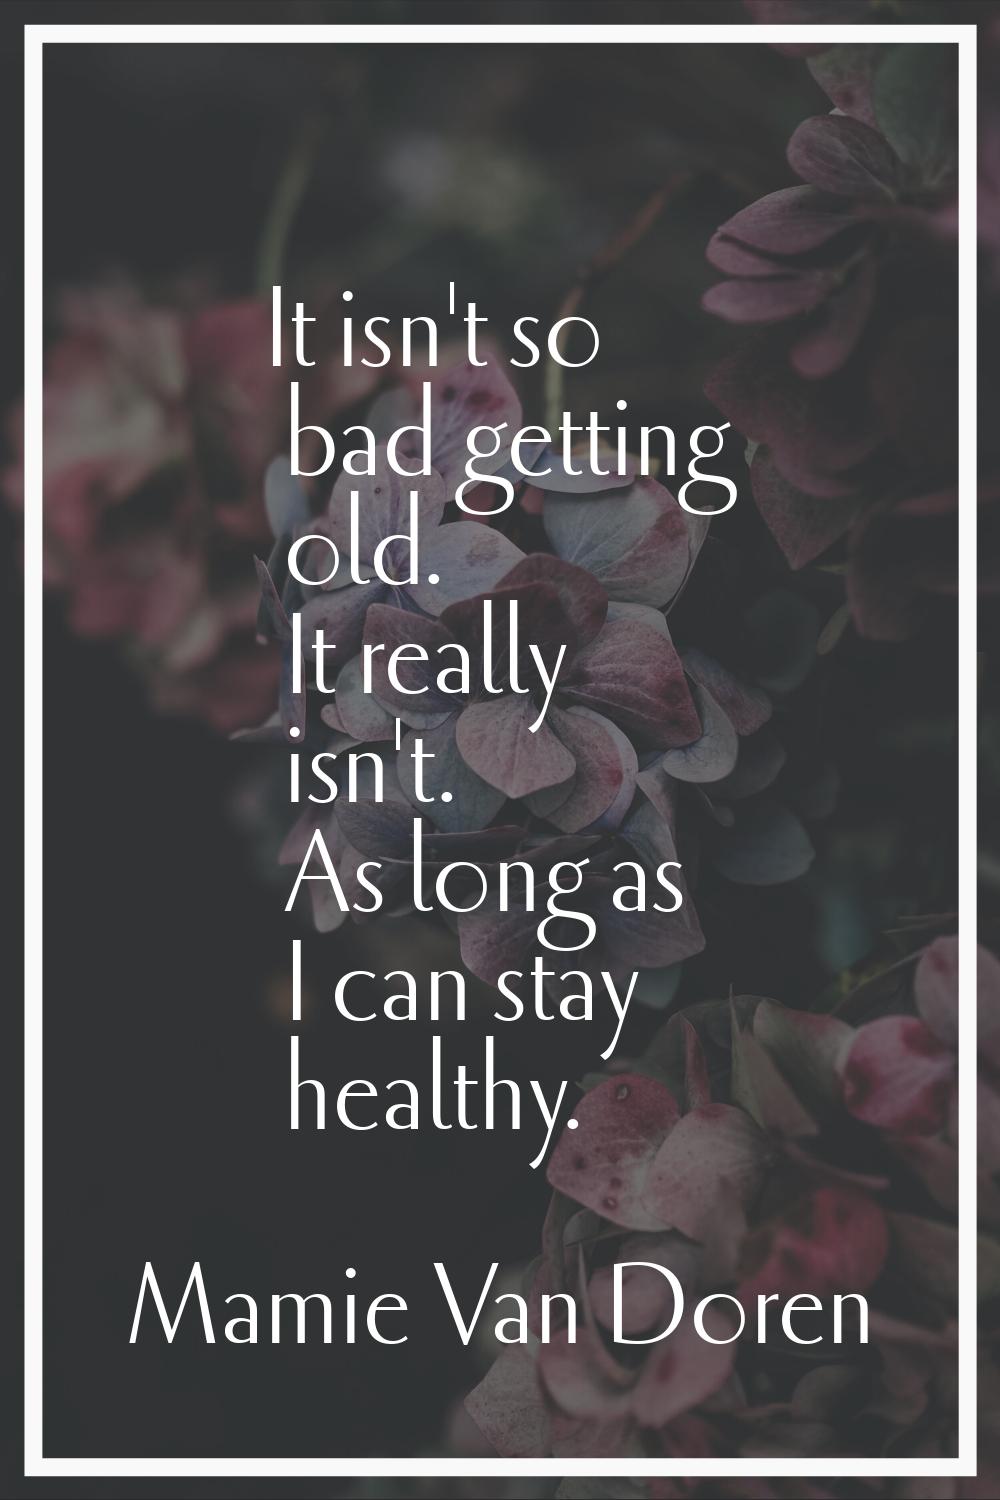 It isn't so bad getting old. It really isn't. As long as I can stay healthy.